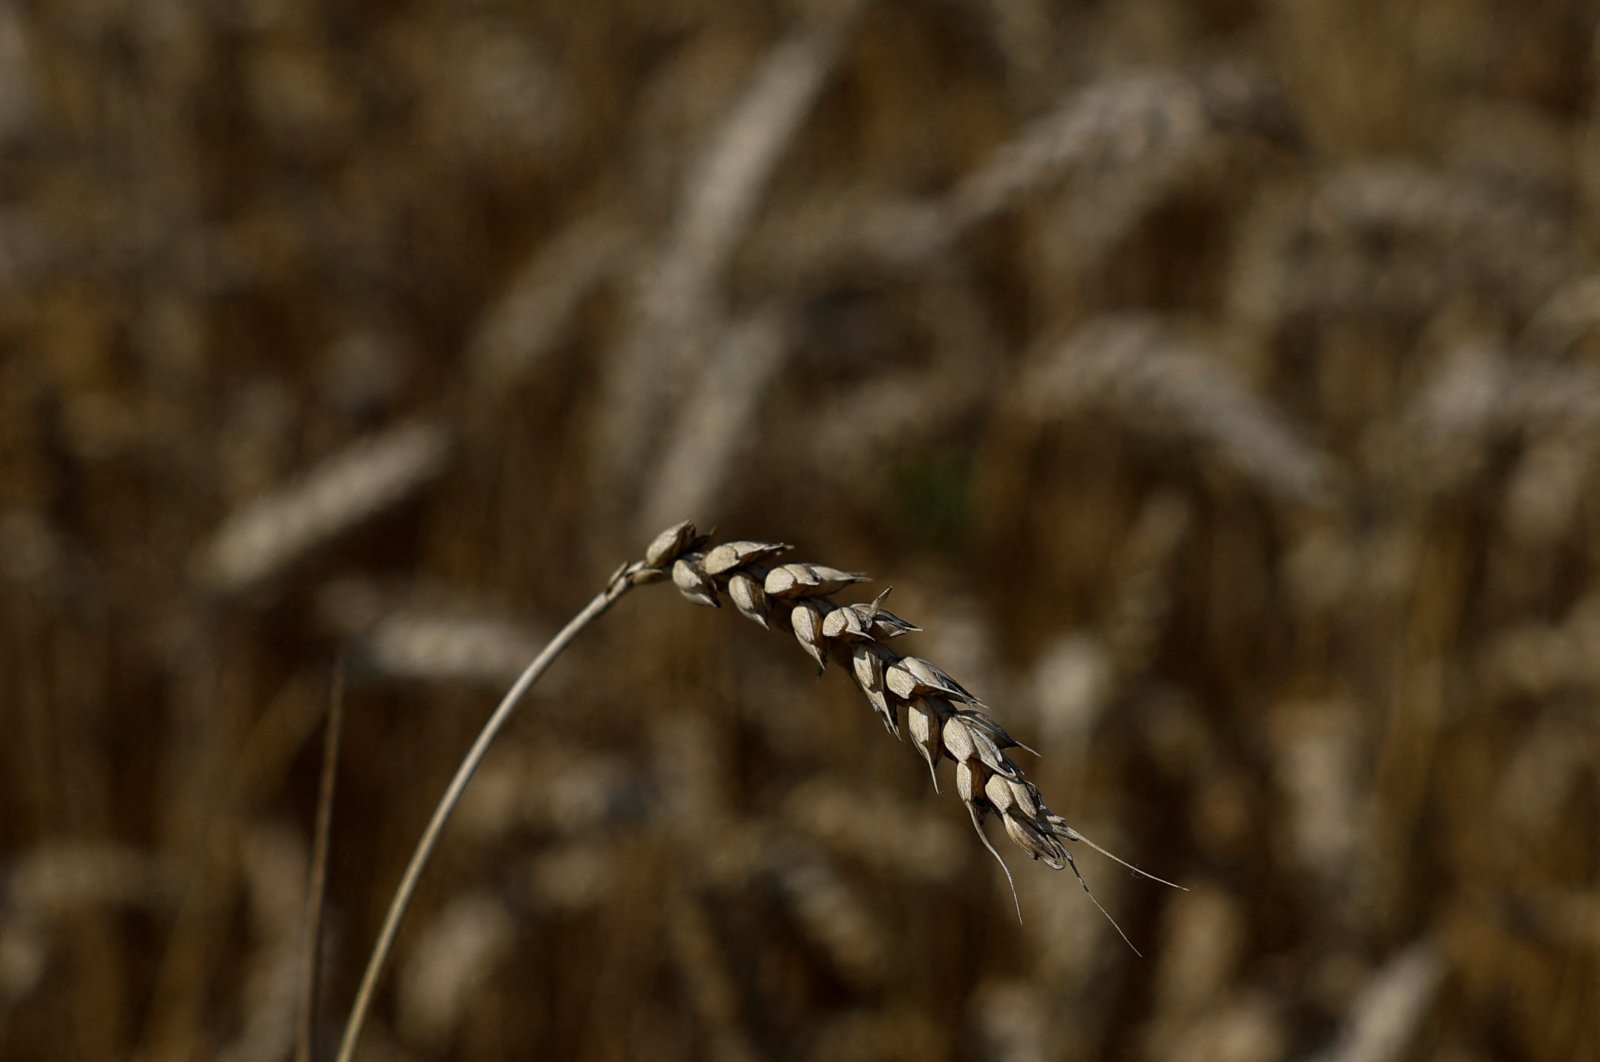 Ukraine unlikely to reduce winter wheat sowing despite export crisis